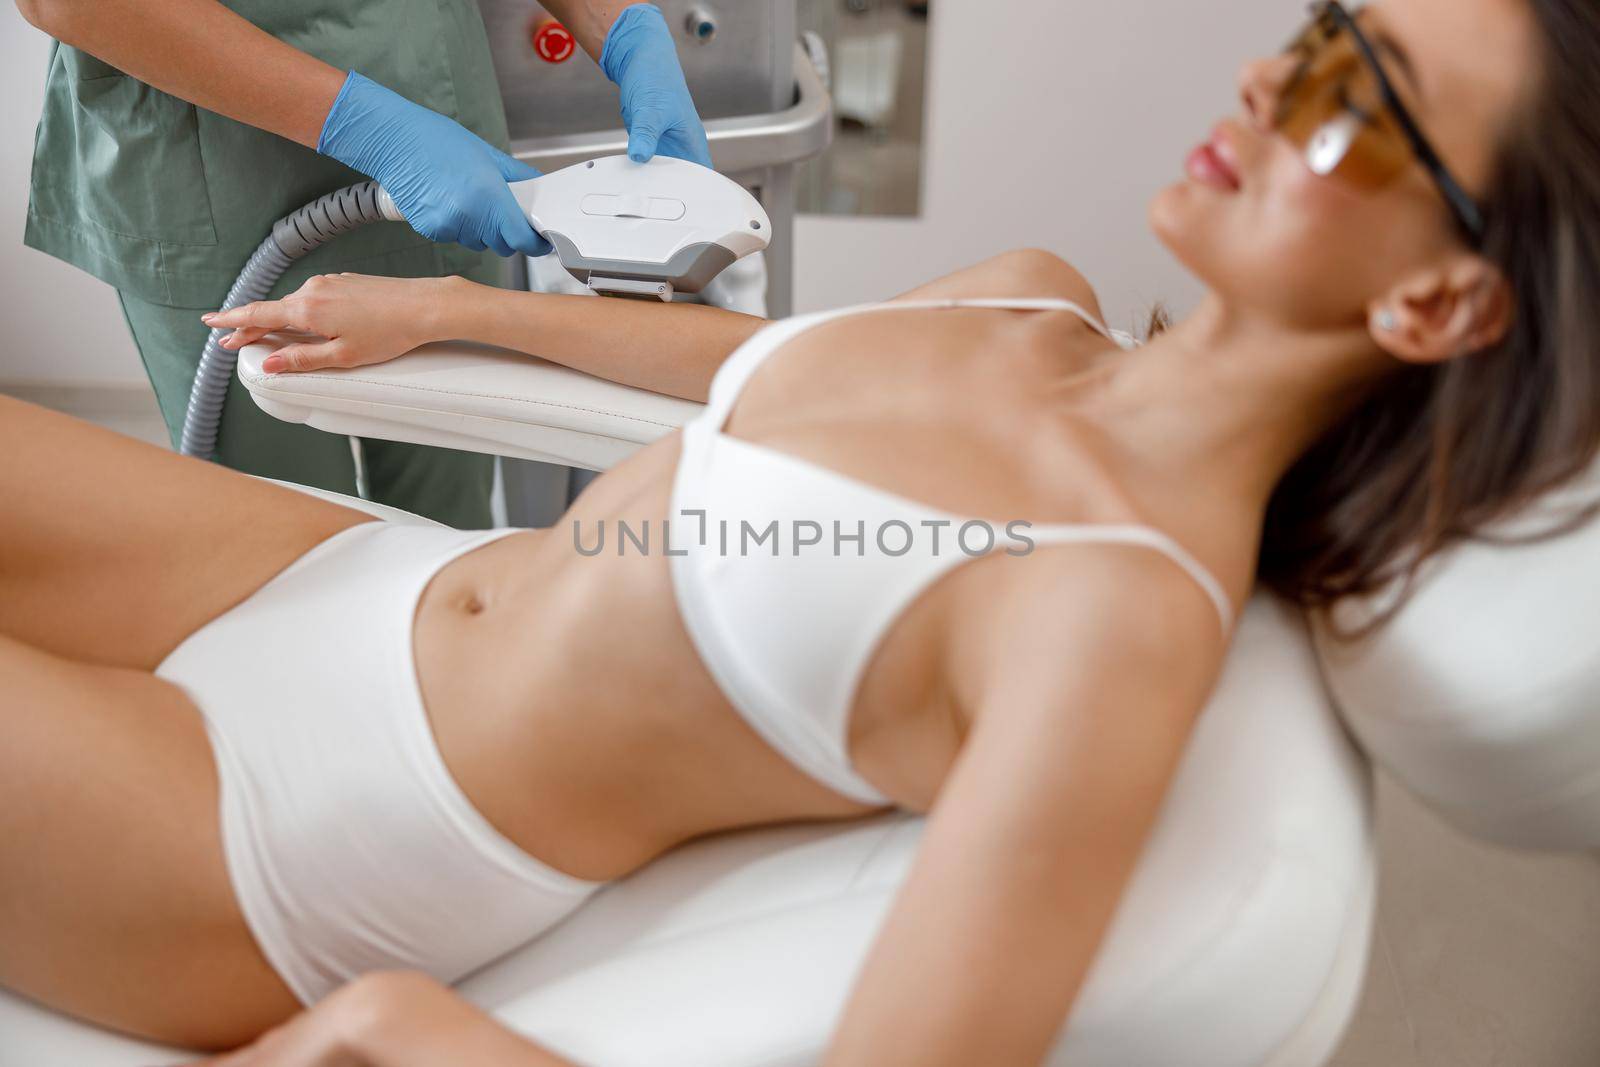 Arms hair removal procedure with ipl machine from a professional cosmetologist in cosmetology salon